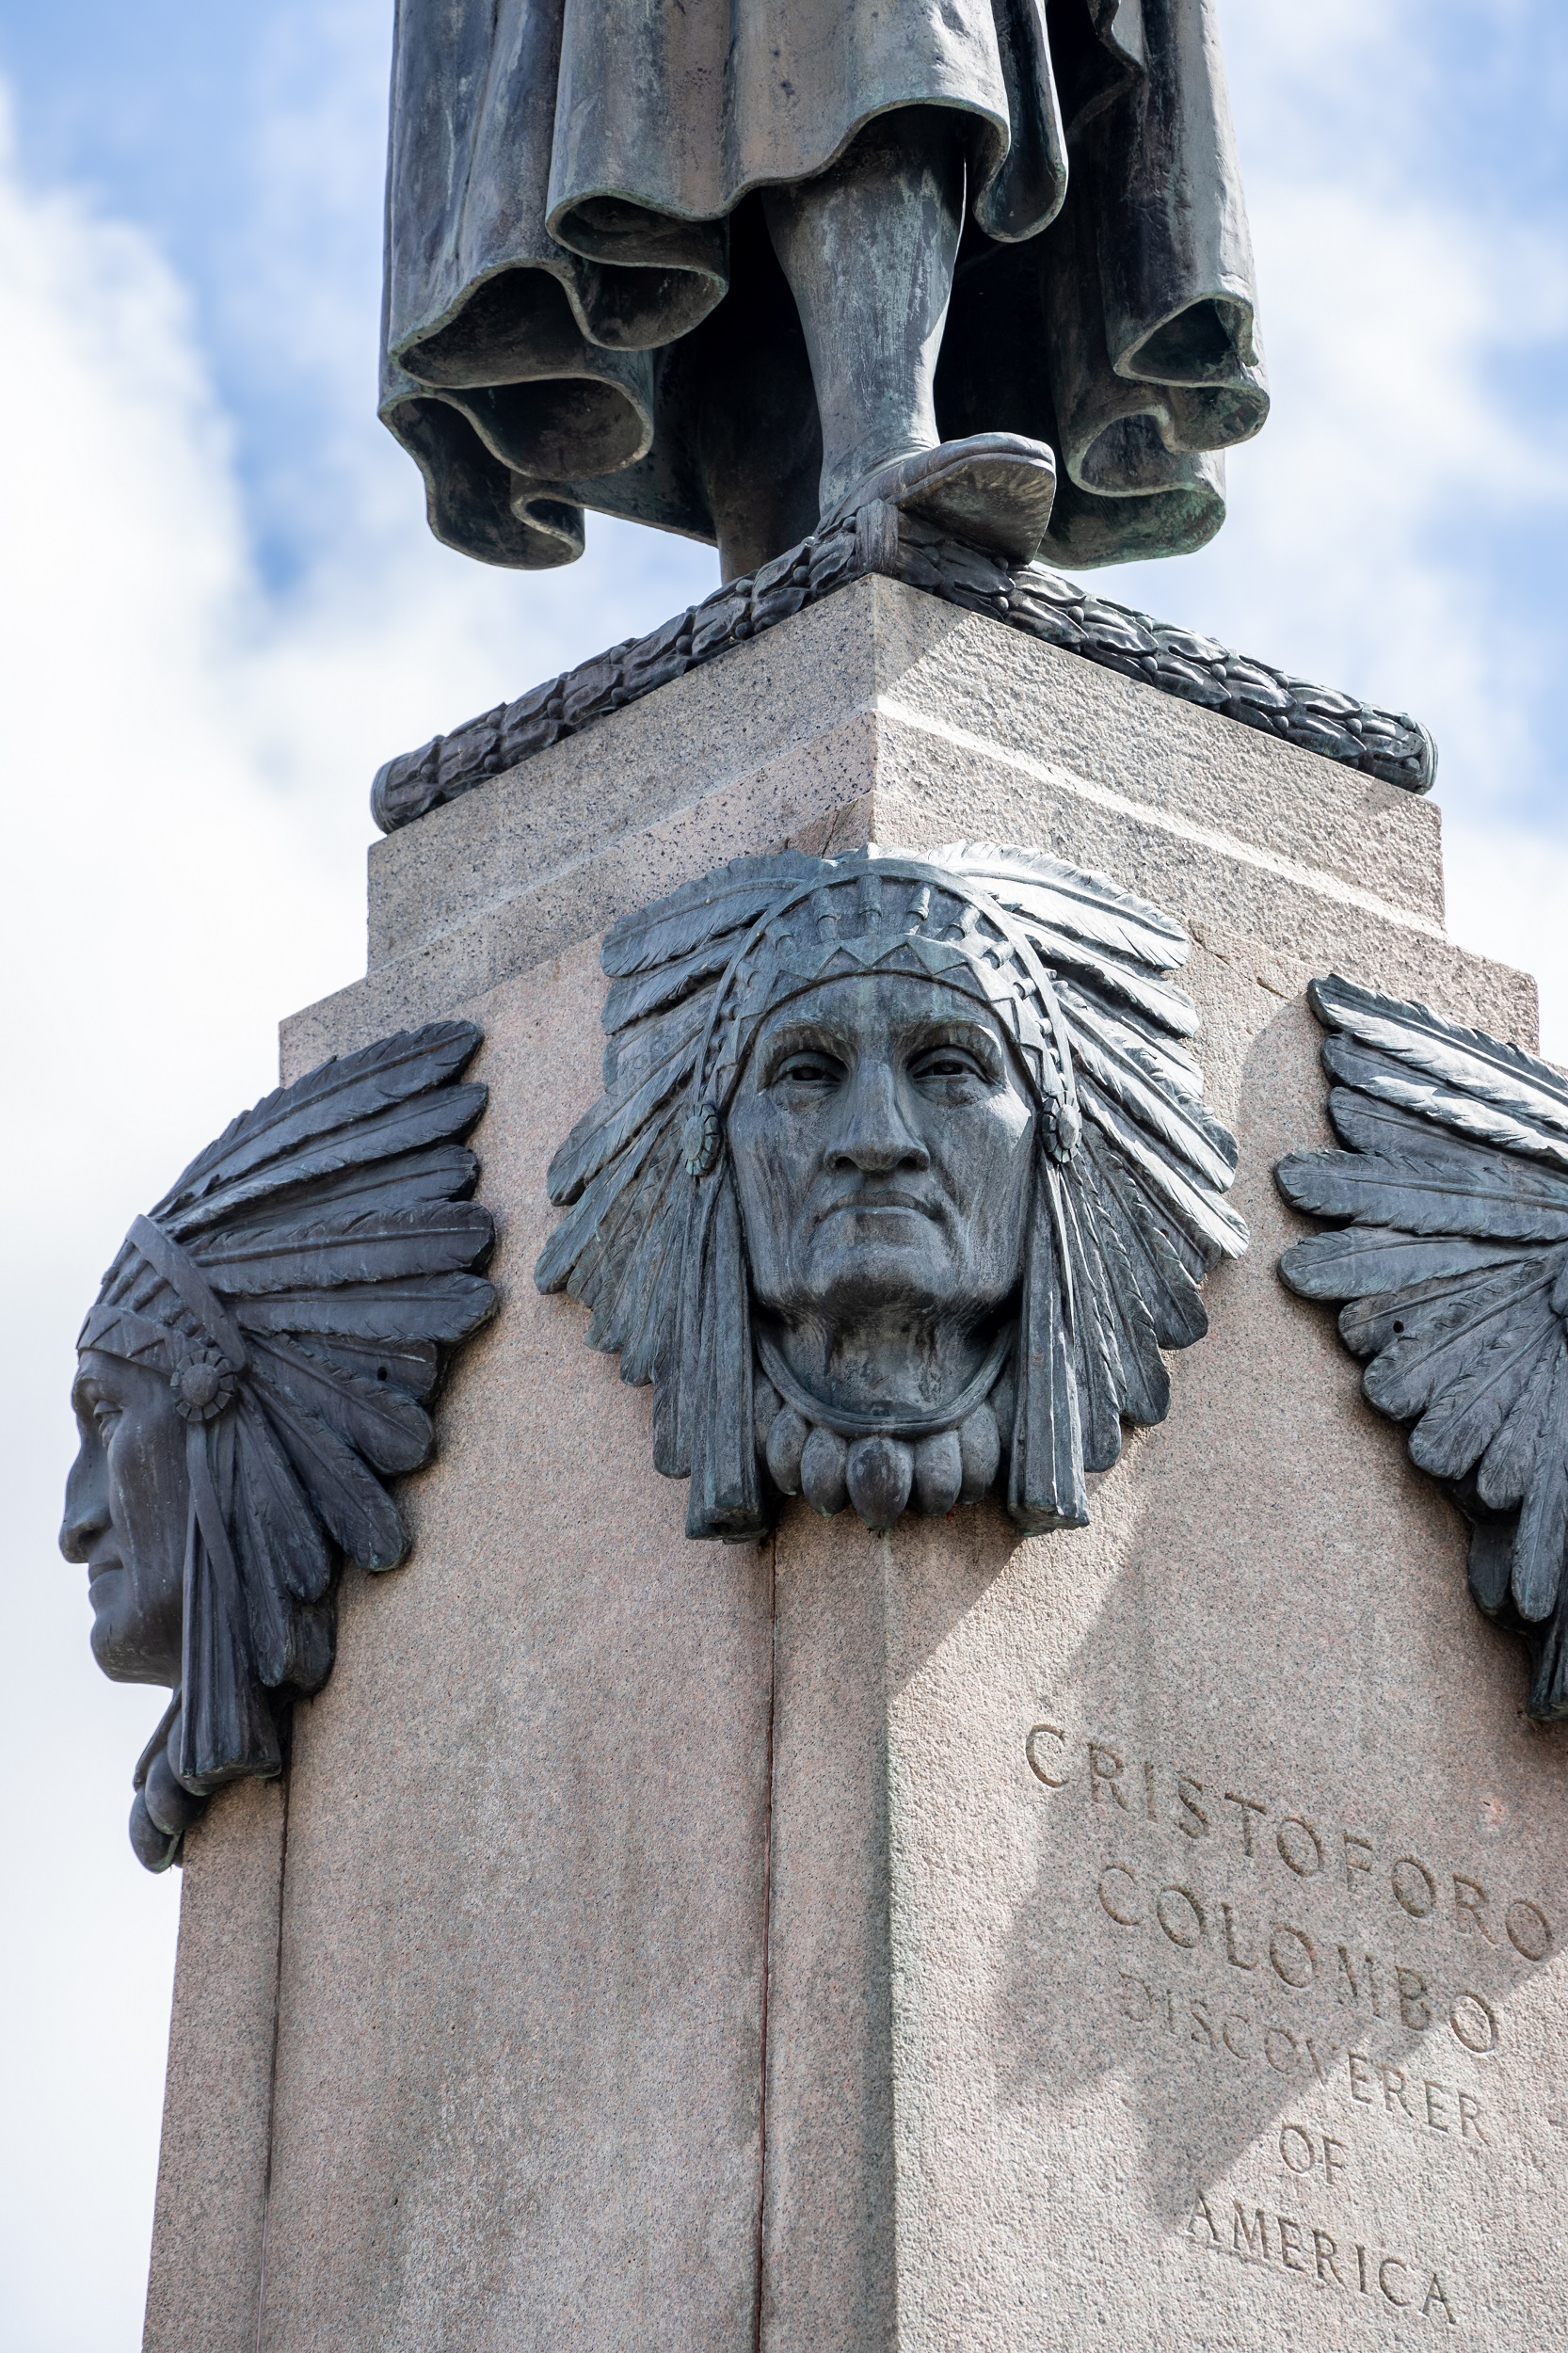 Detail of the base of the monument in fig. 3, showing bronze heads of Native Americans, wearing Plains war bonnets, attached to the corners of the pedestal, below the feet of the statue of Christopher Columbus.